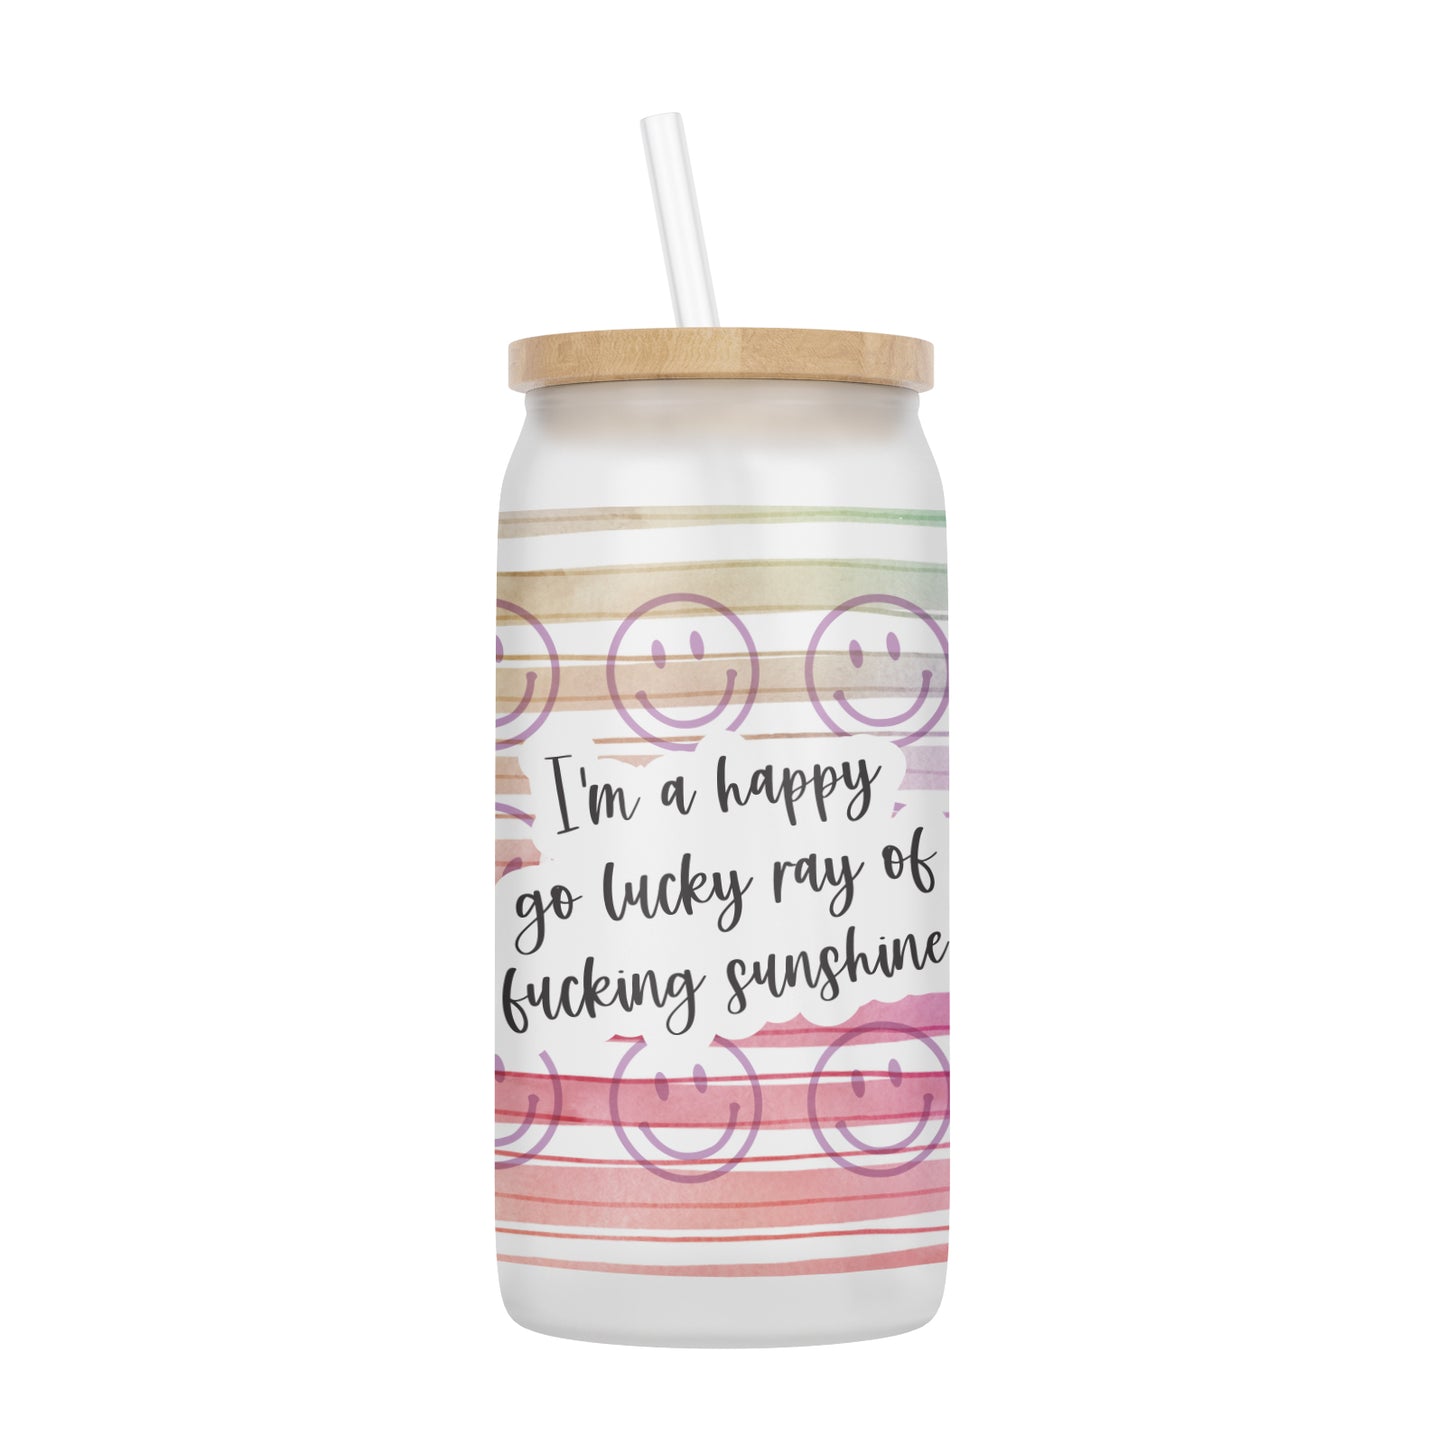 I'm a Happy Go Lucky Ray of Fucking Sunshine 16 oz Glass Jar With Lid